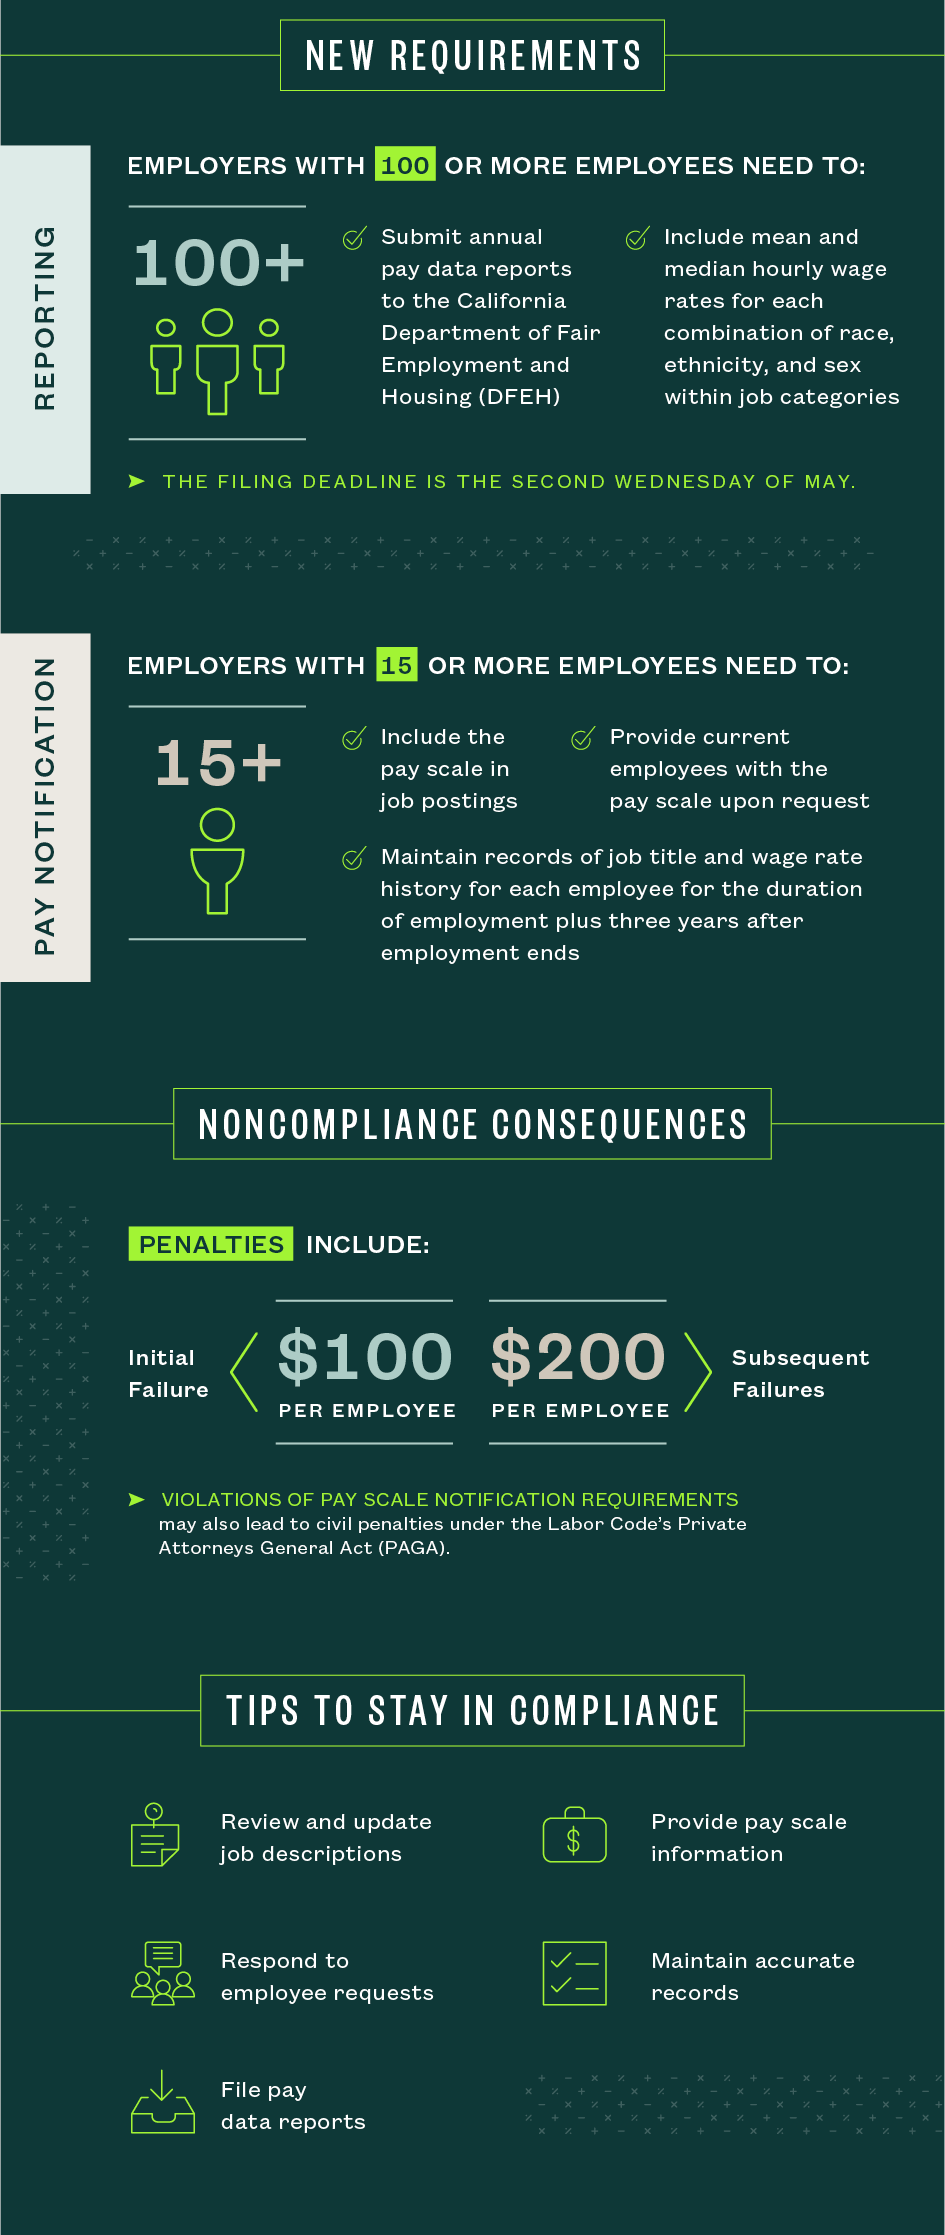 Requirements of and tips to stay in compliance with the California Pay Transparency Act